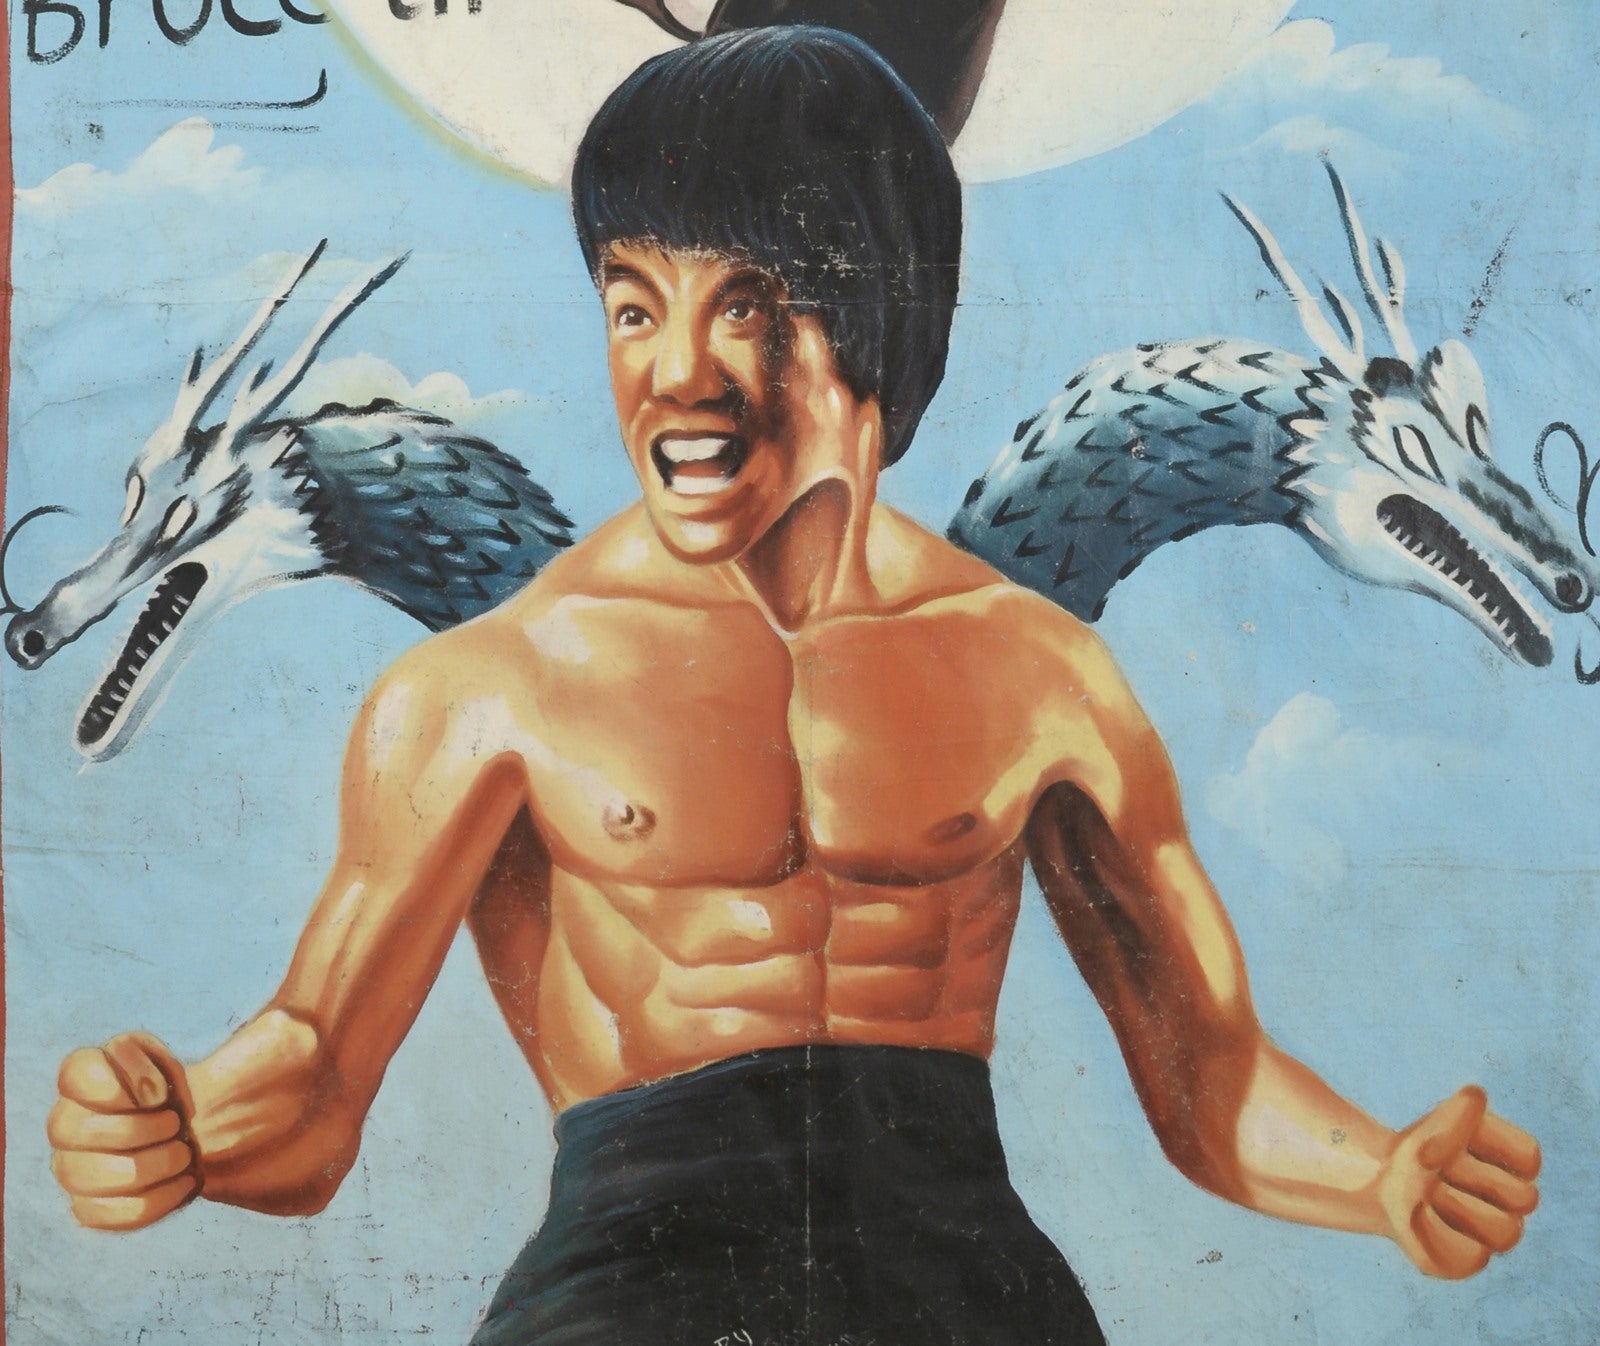 BRUCE LEE ENTER THE DRAGON MOVIE POSTER FROM GHANA MORE DETAILS